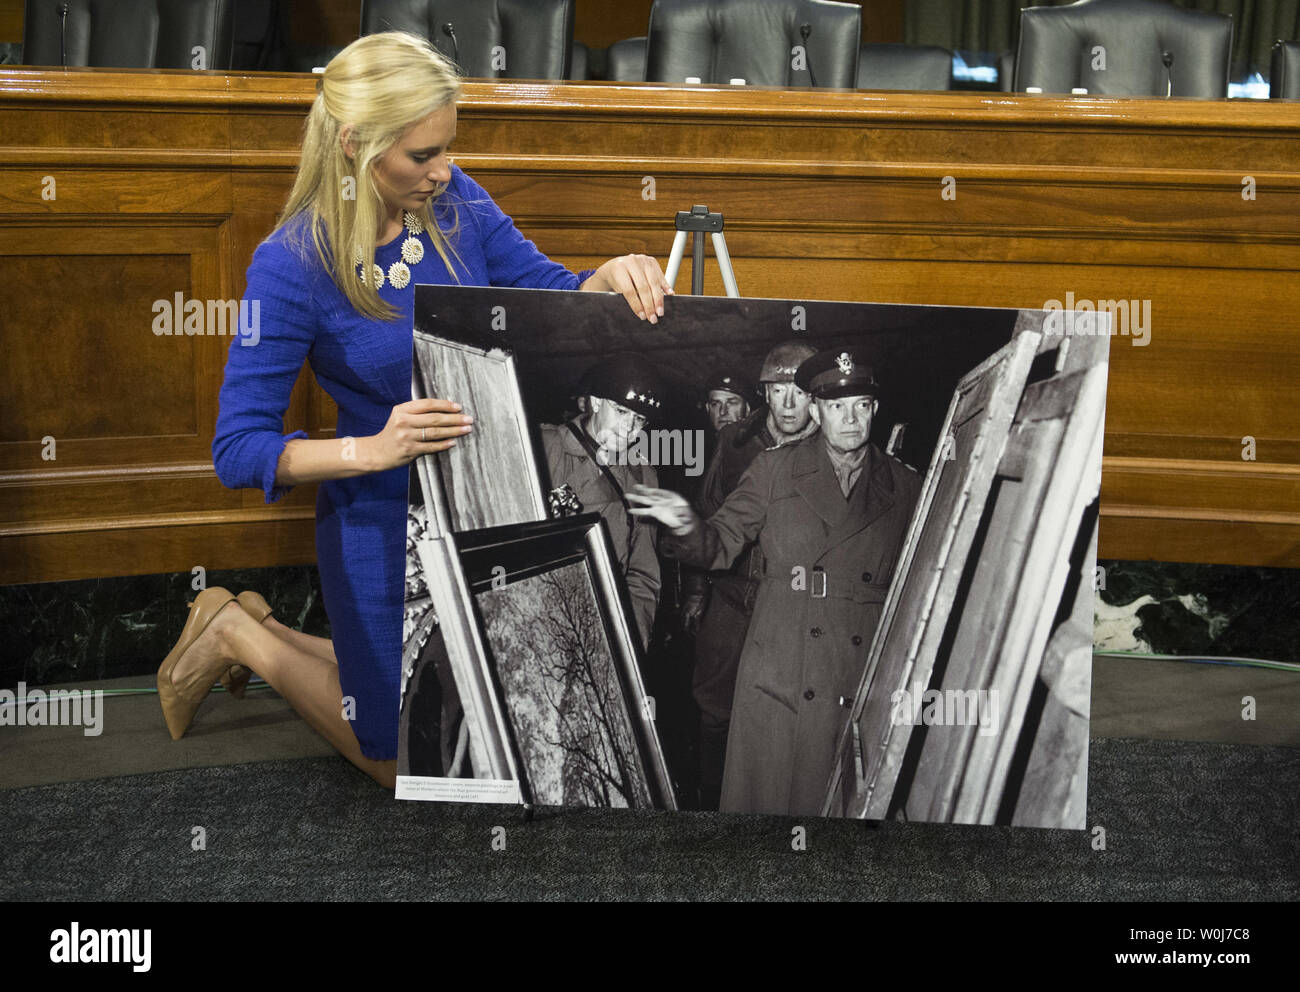 A Senate staffer adjusts World War II era photos of American soldiers recovered Nazi stolen artwork prior to a Senate Judiciary subcommittee hearing on the  HEAR Act, legislation aimed at helping Holocaust survivors and their families recover art stolen by the Nazis, on Capitol Hill in Washington, D.C. on June 7, 2016. Photo by Kevin Dietsch/UPI Stock Photo